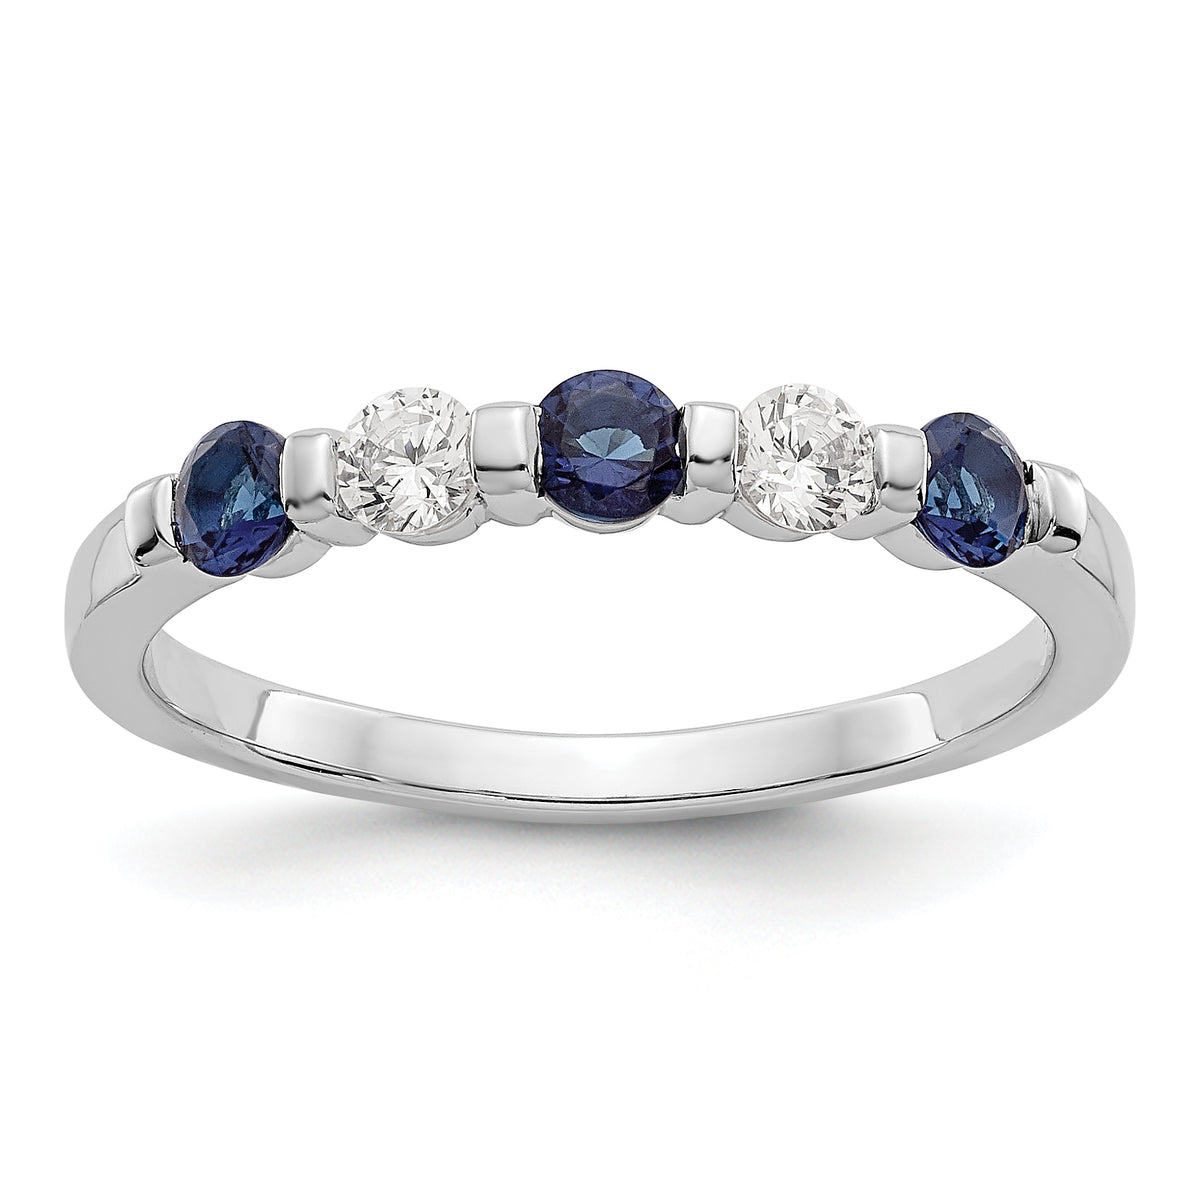 14k White Gold 1/5 carat Diamond and Blue Sapphire Complete Band